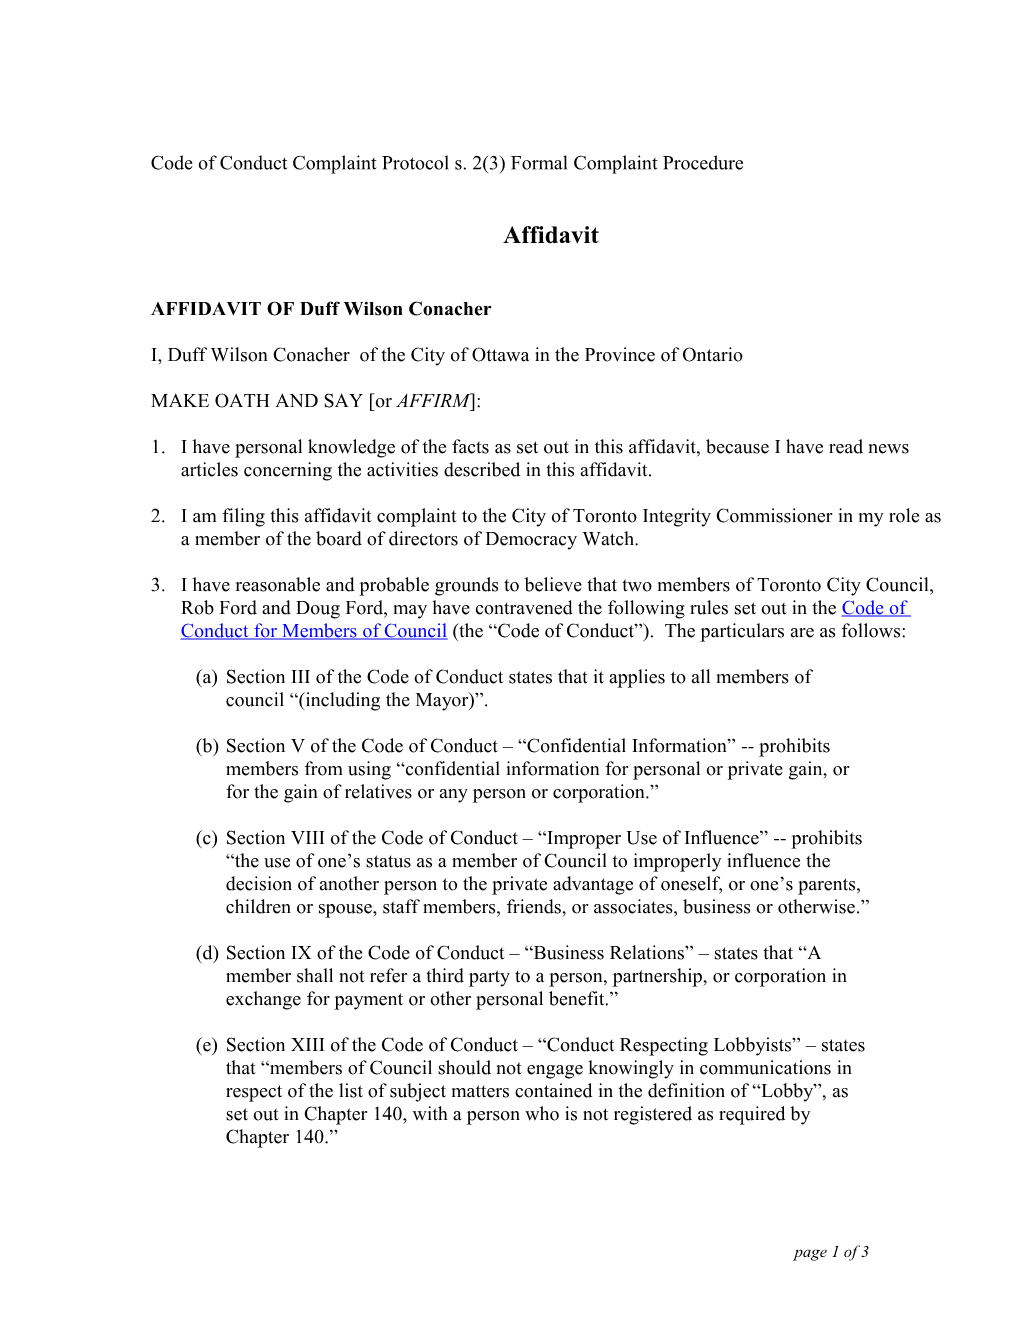 Code of Conduct Complaint Protocol S